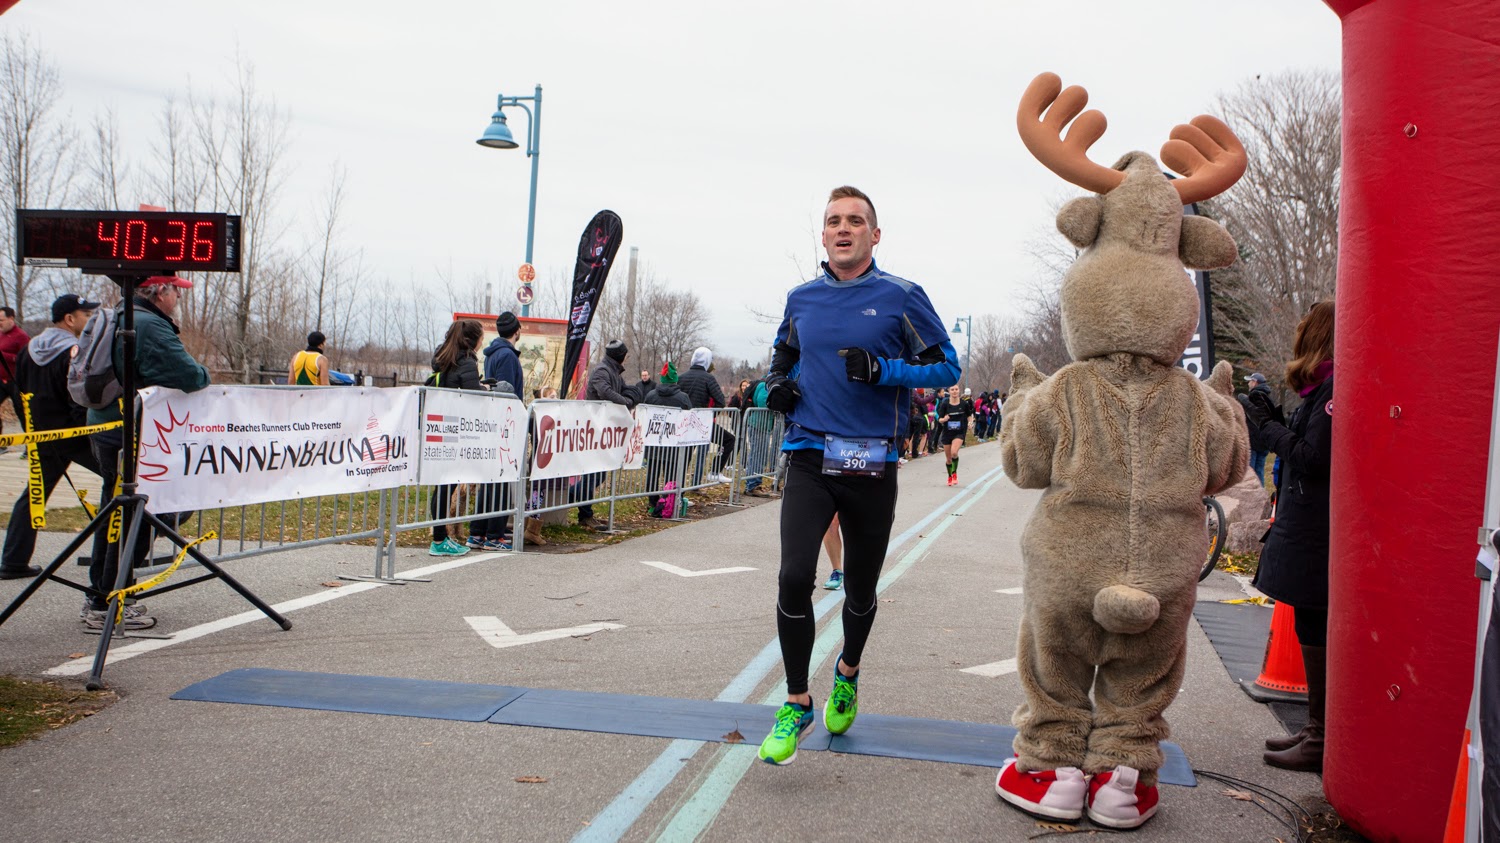 Crossing the finish line at the 2016 Tannenbaum 10k at the 40:36 mark, setting my 10k PB at 40:29